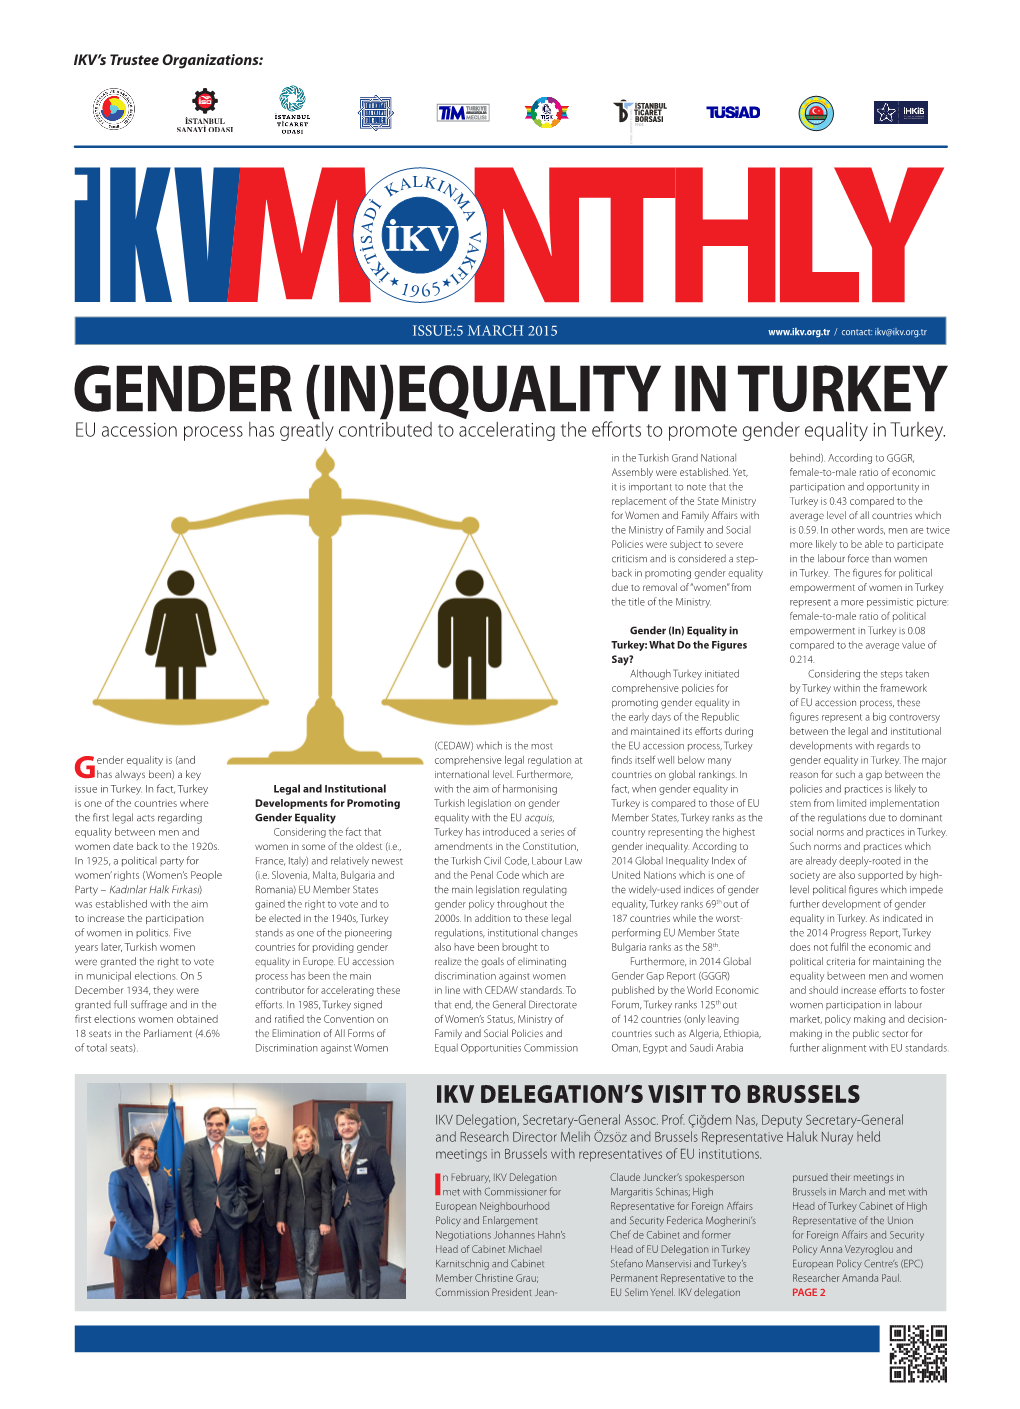 GENDER (IN)EQUALITY in TURKEY EU Accession Process Has Greatly Contributed to Accelerating the Efforts to Promote Gender Equality in Turkey